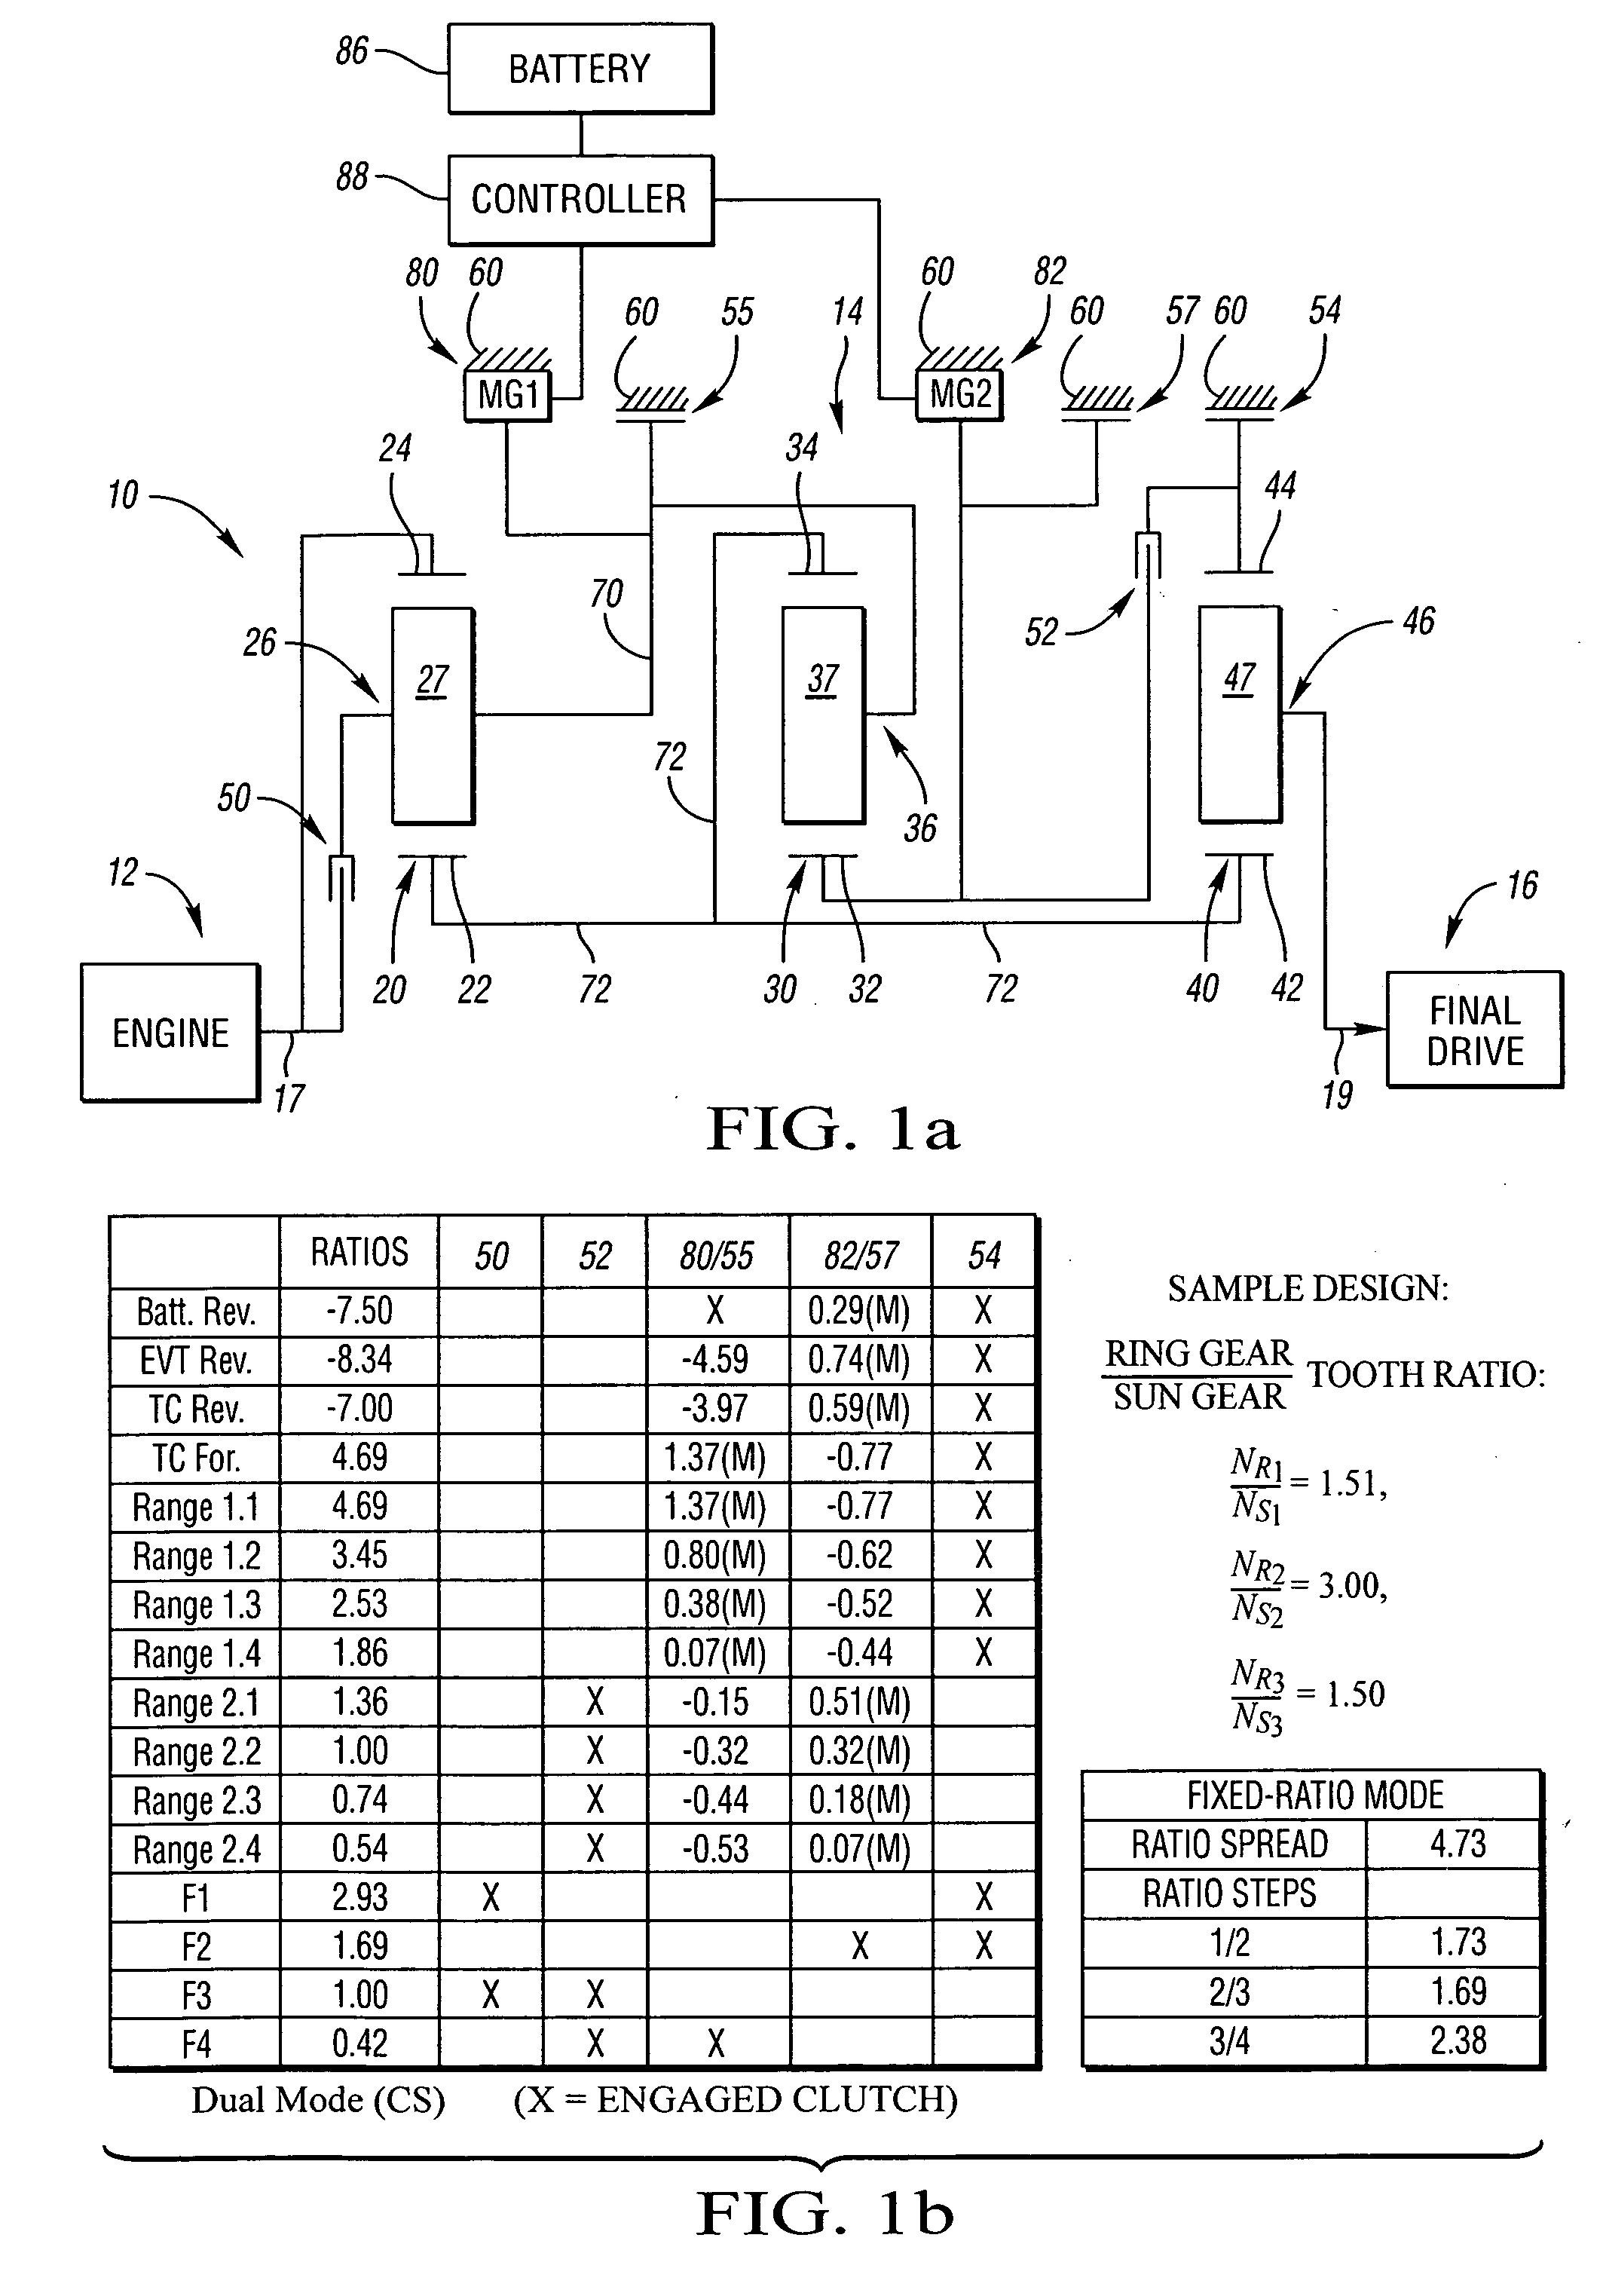 Electrically variable transmision having three interconnected planetary gear sets